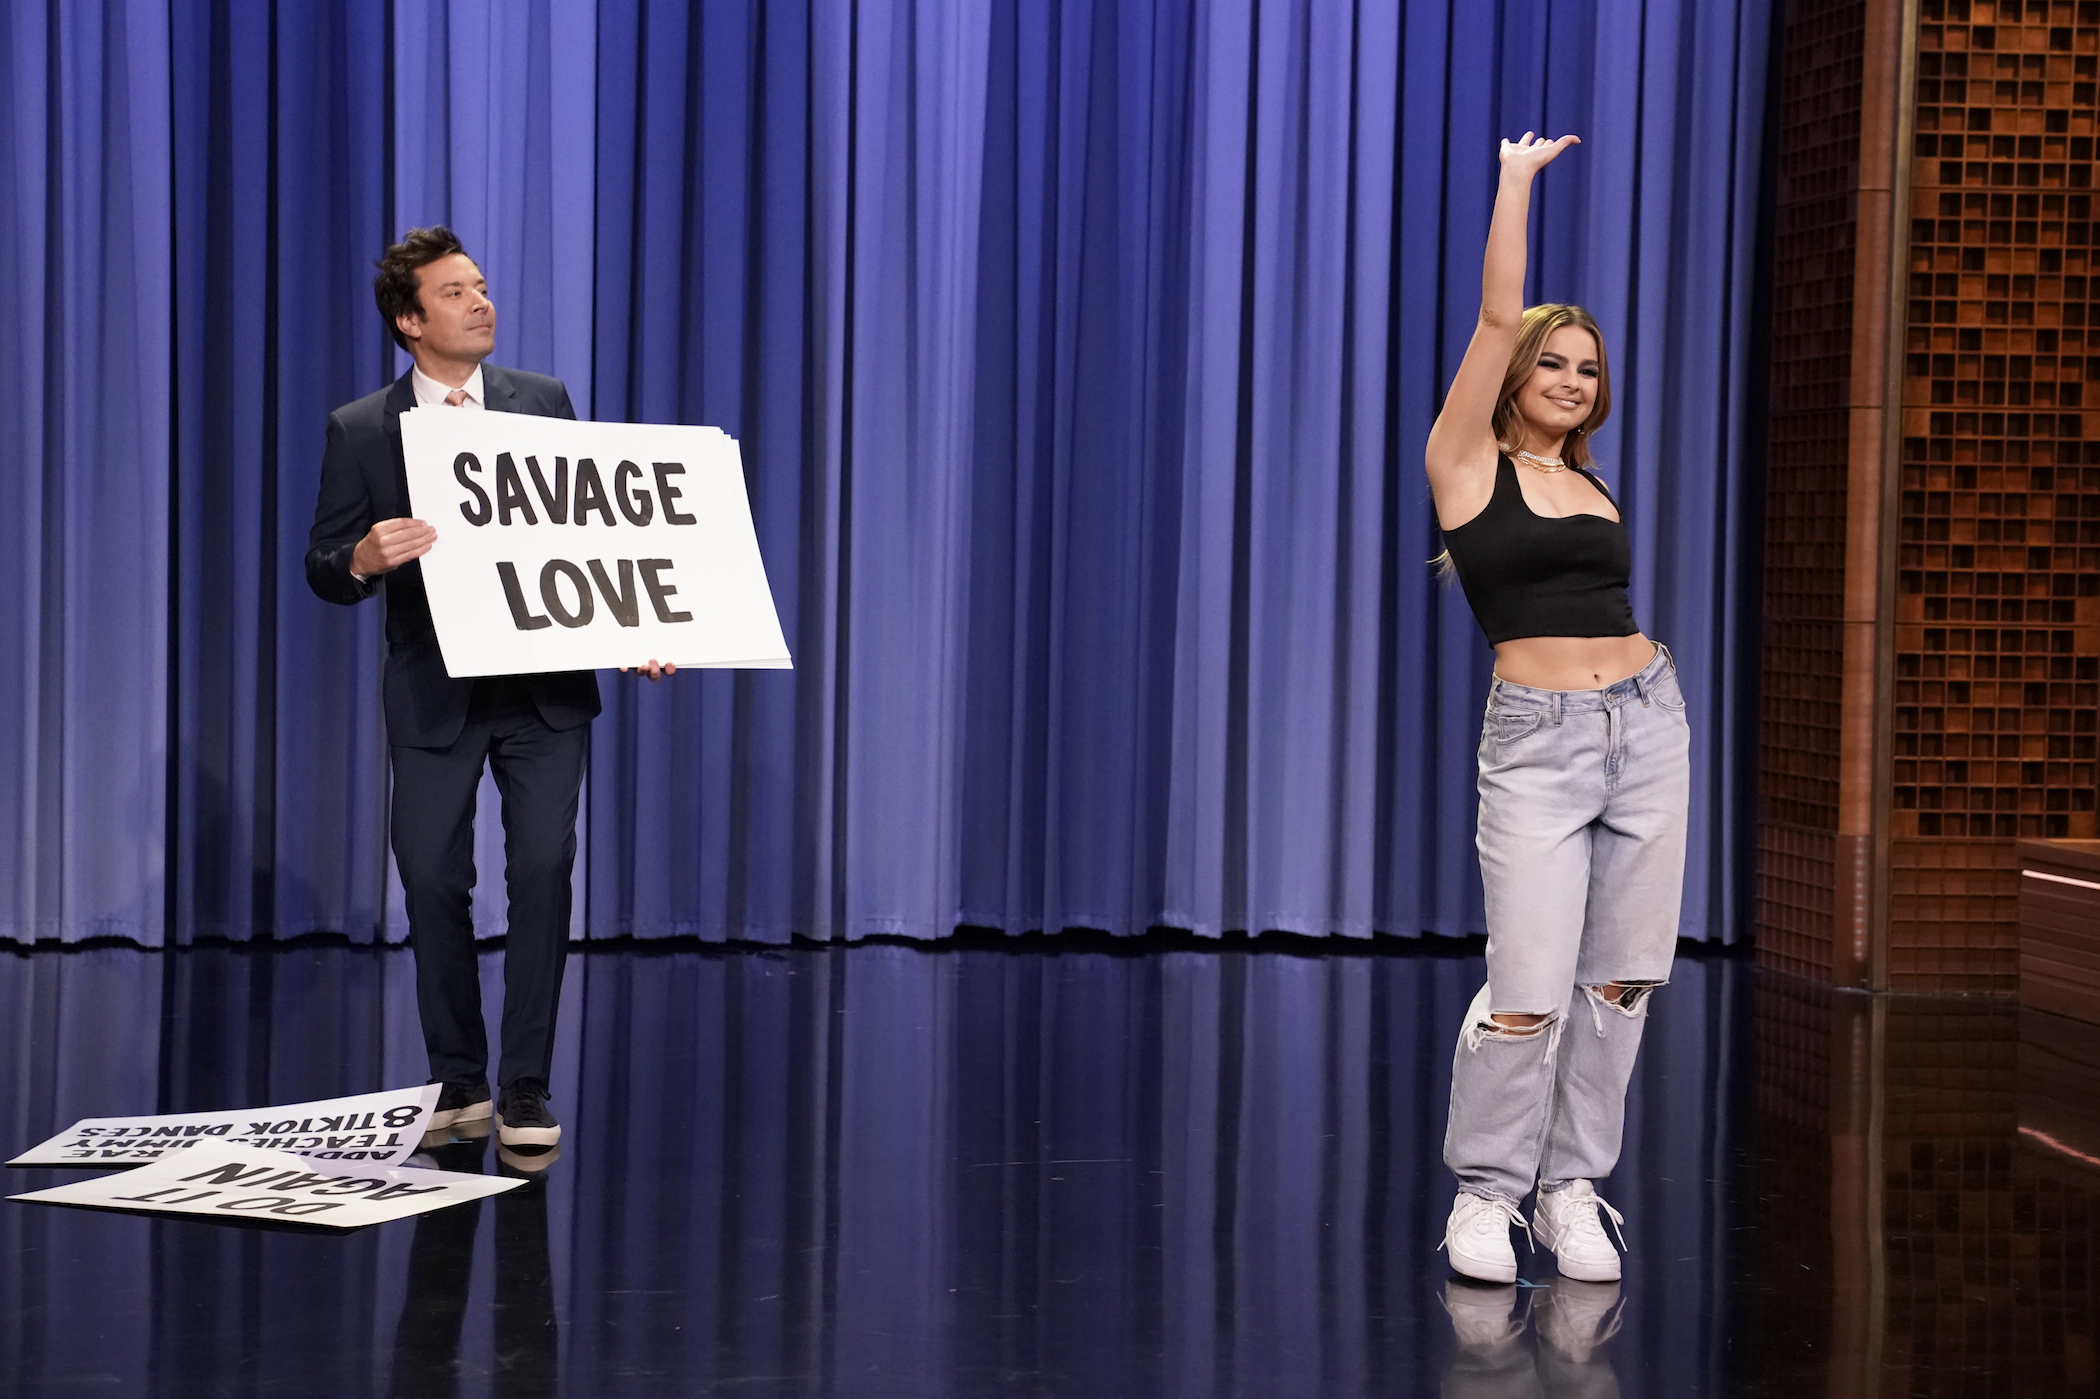 Addison Rae on the stage of 'The Tonight Show Starring Jimmy Fallon' with Jimmy Fallon in the background. Addison Rae's net worth is impressive thanks to her TikTok fame